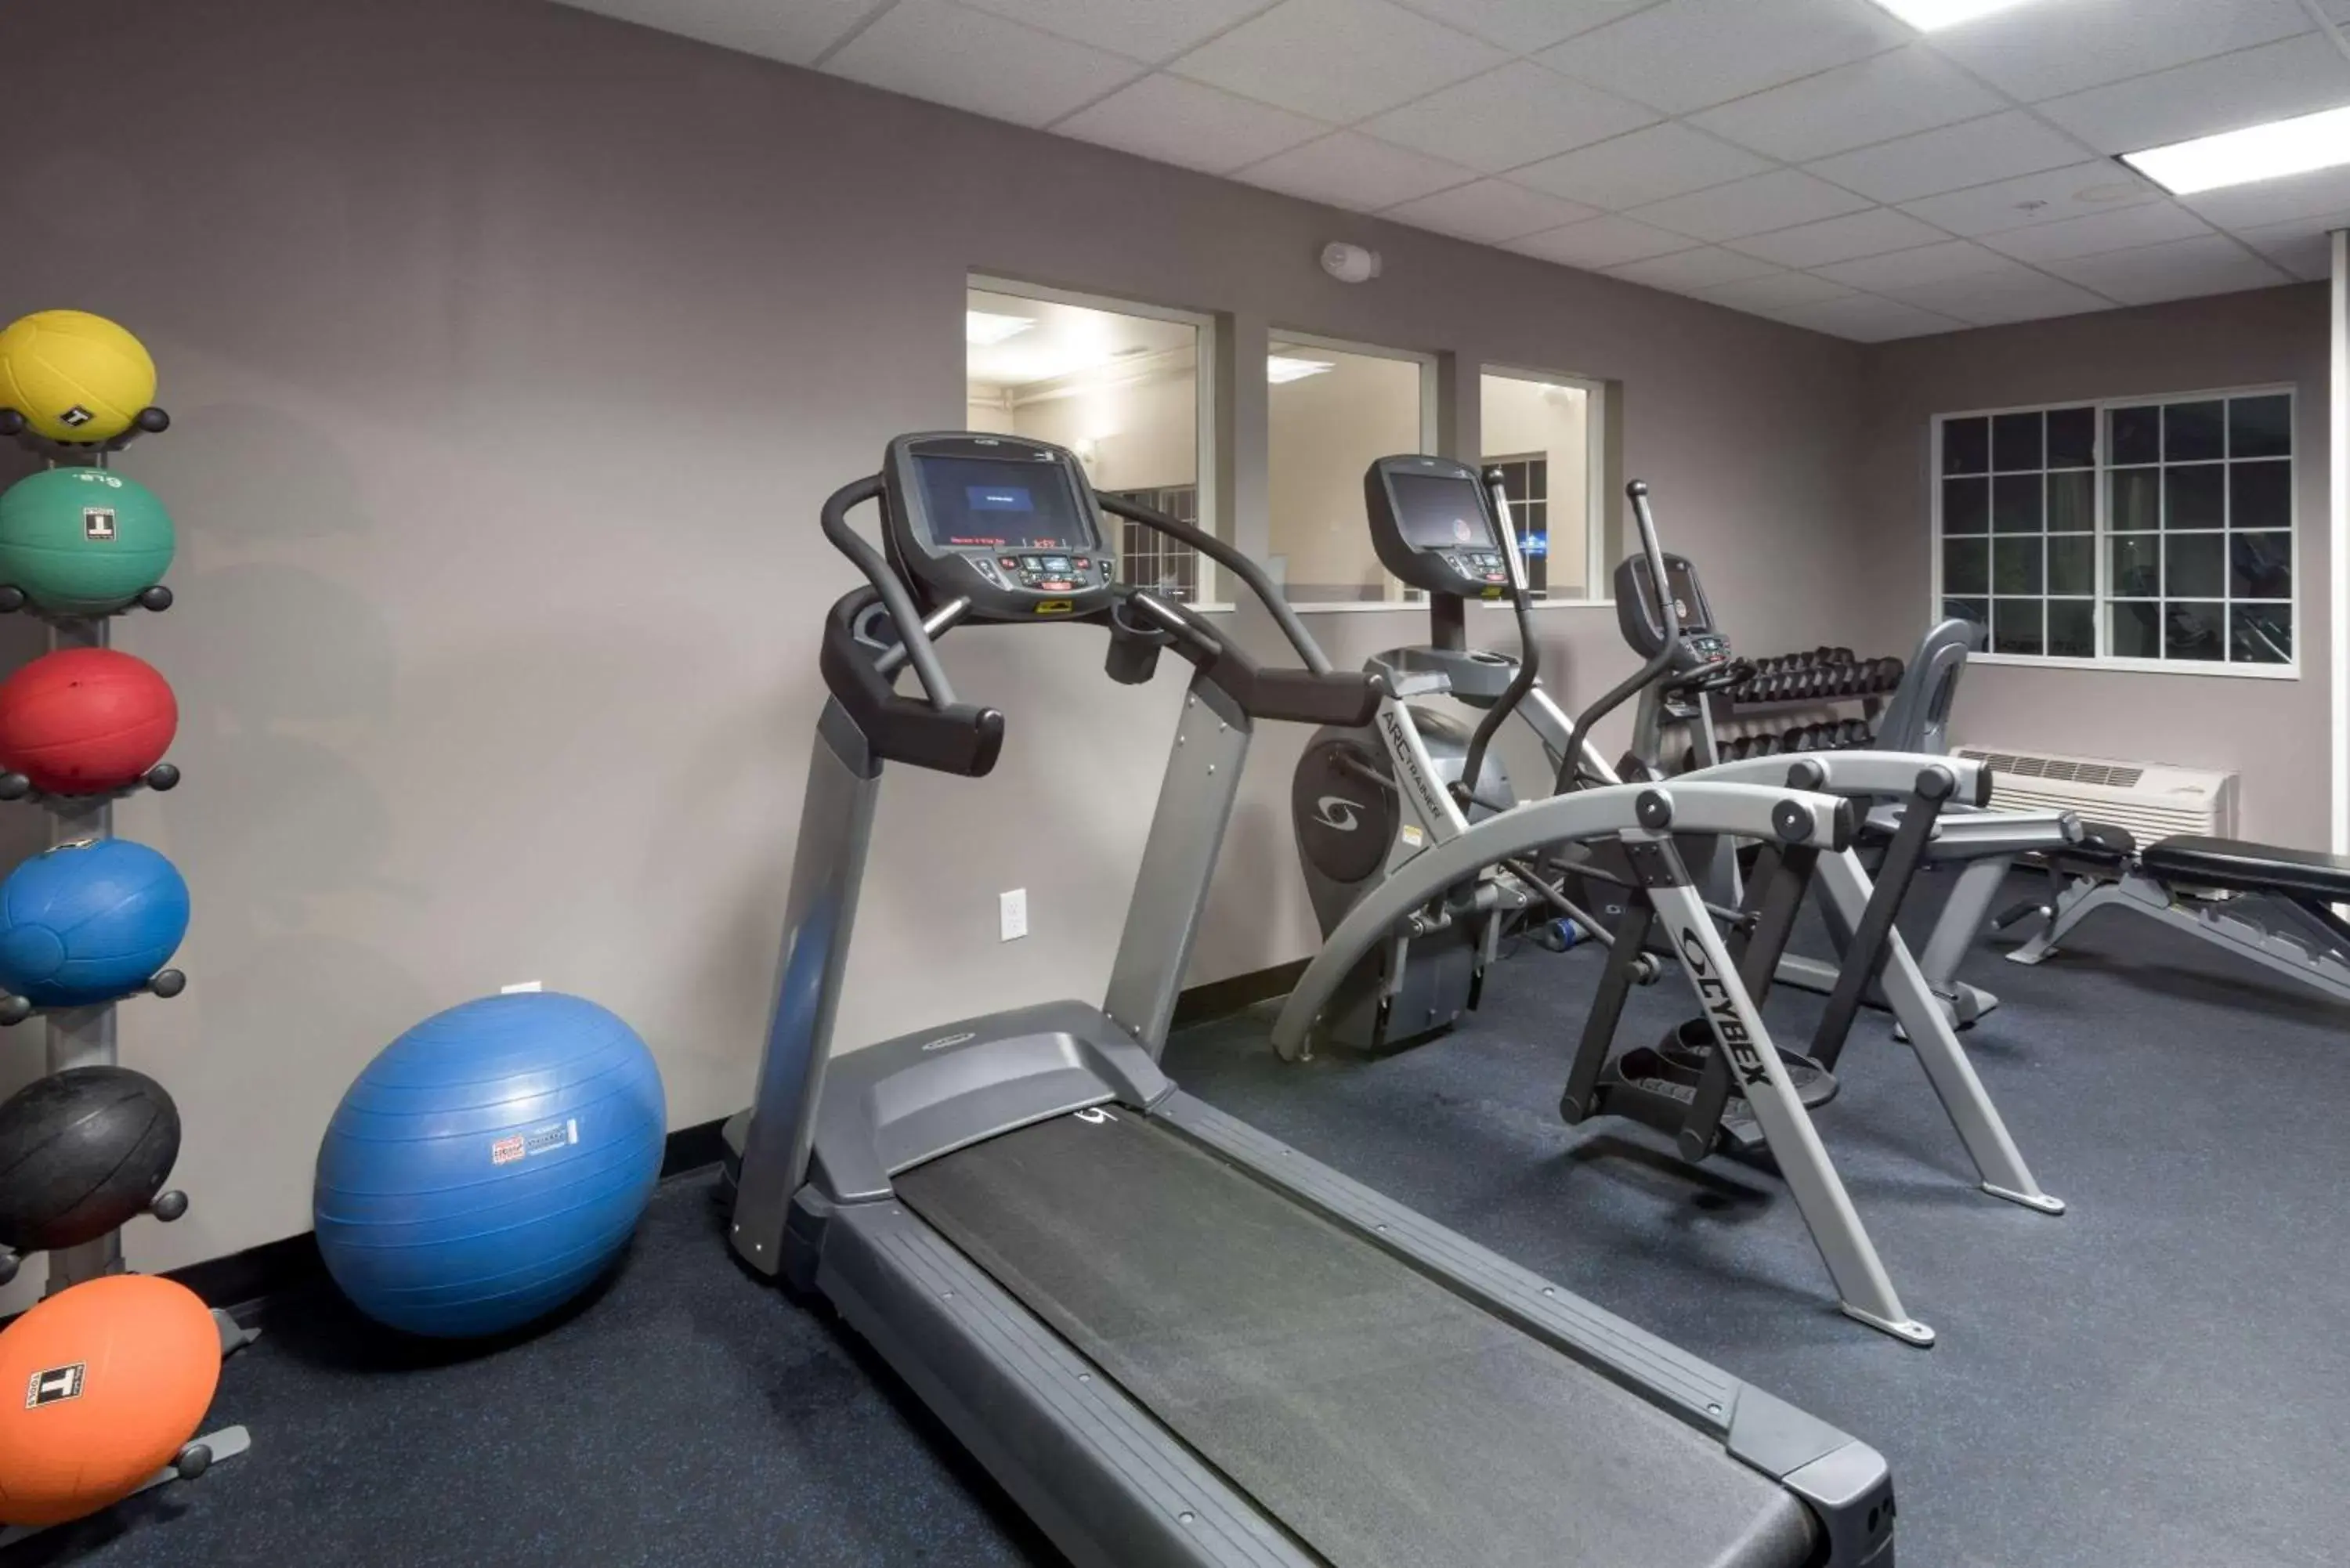 Fitness centre/facilities, Fitness Center/Facilities in Microtel Inn & Suites Windham